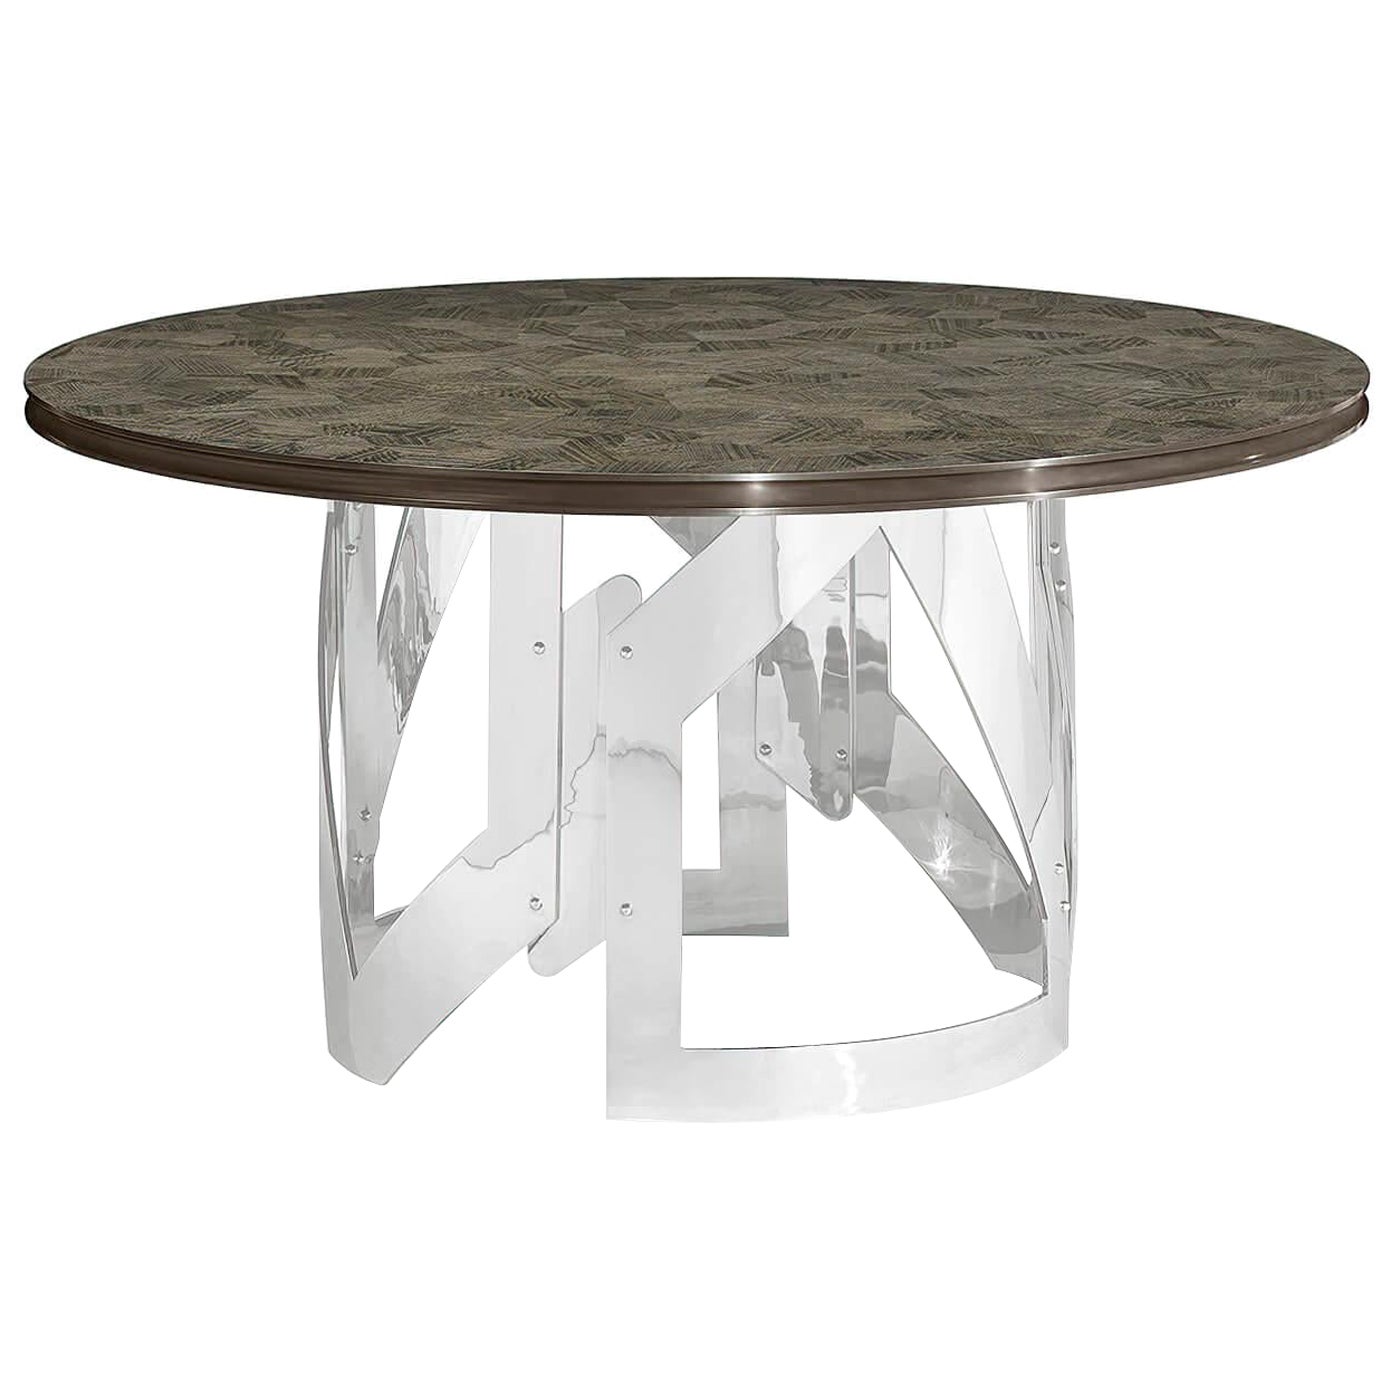 Gatsby Art Deco Dining Table For Sale